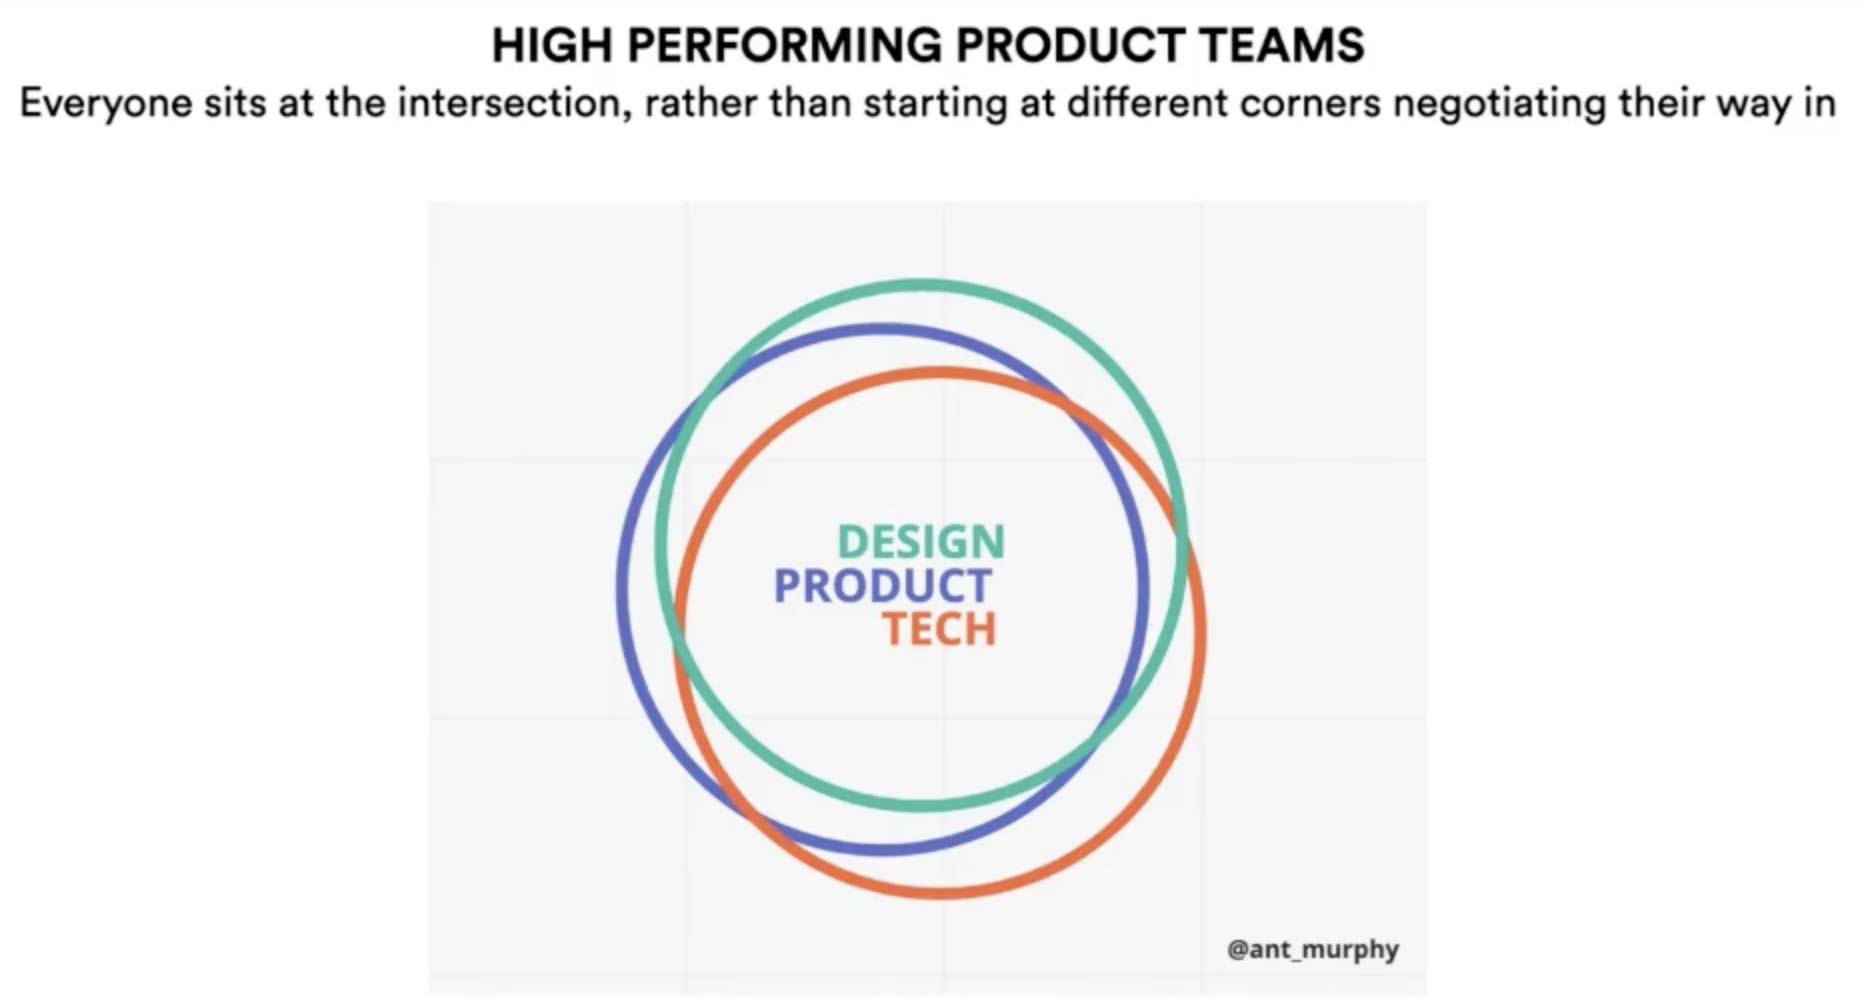 High Performing Product Teams: Everyone sits at the intersection, rather than starting at different corners negotiating their way in.